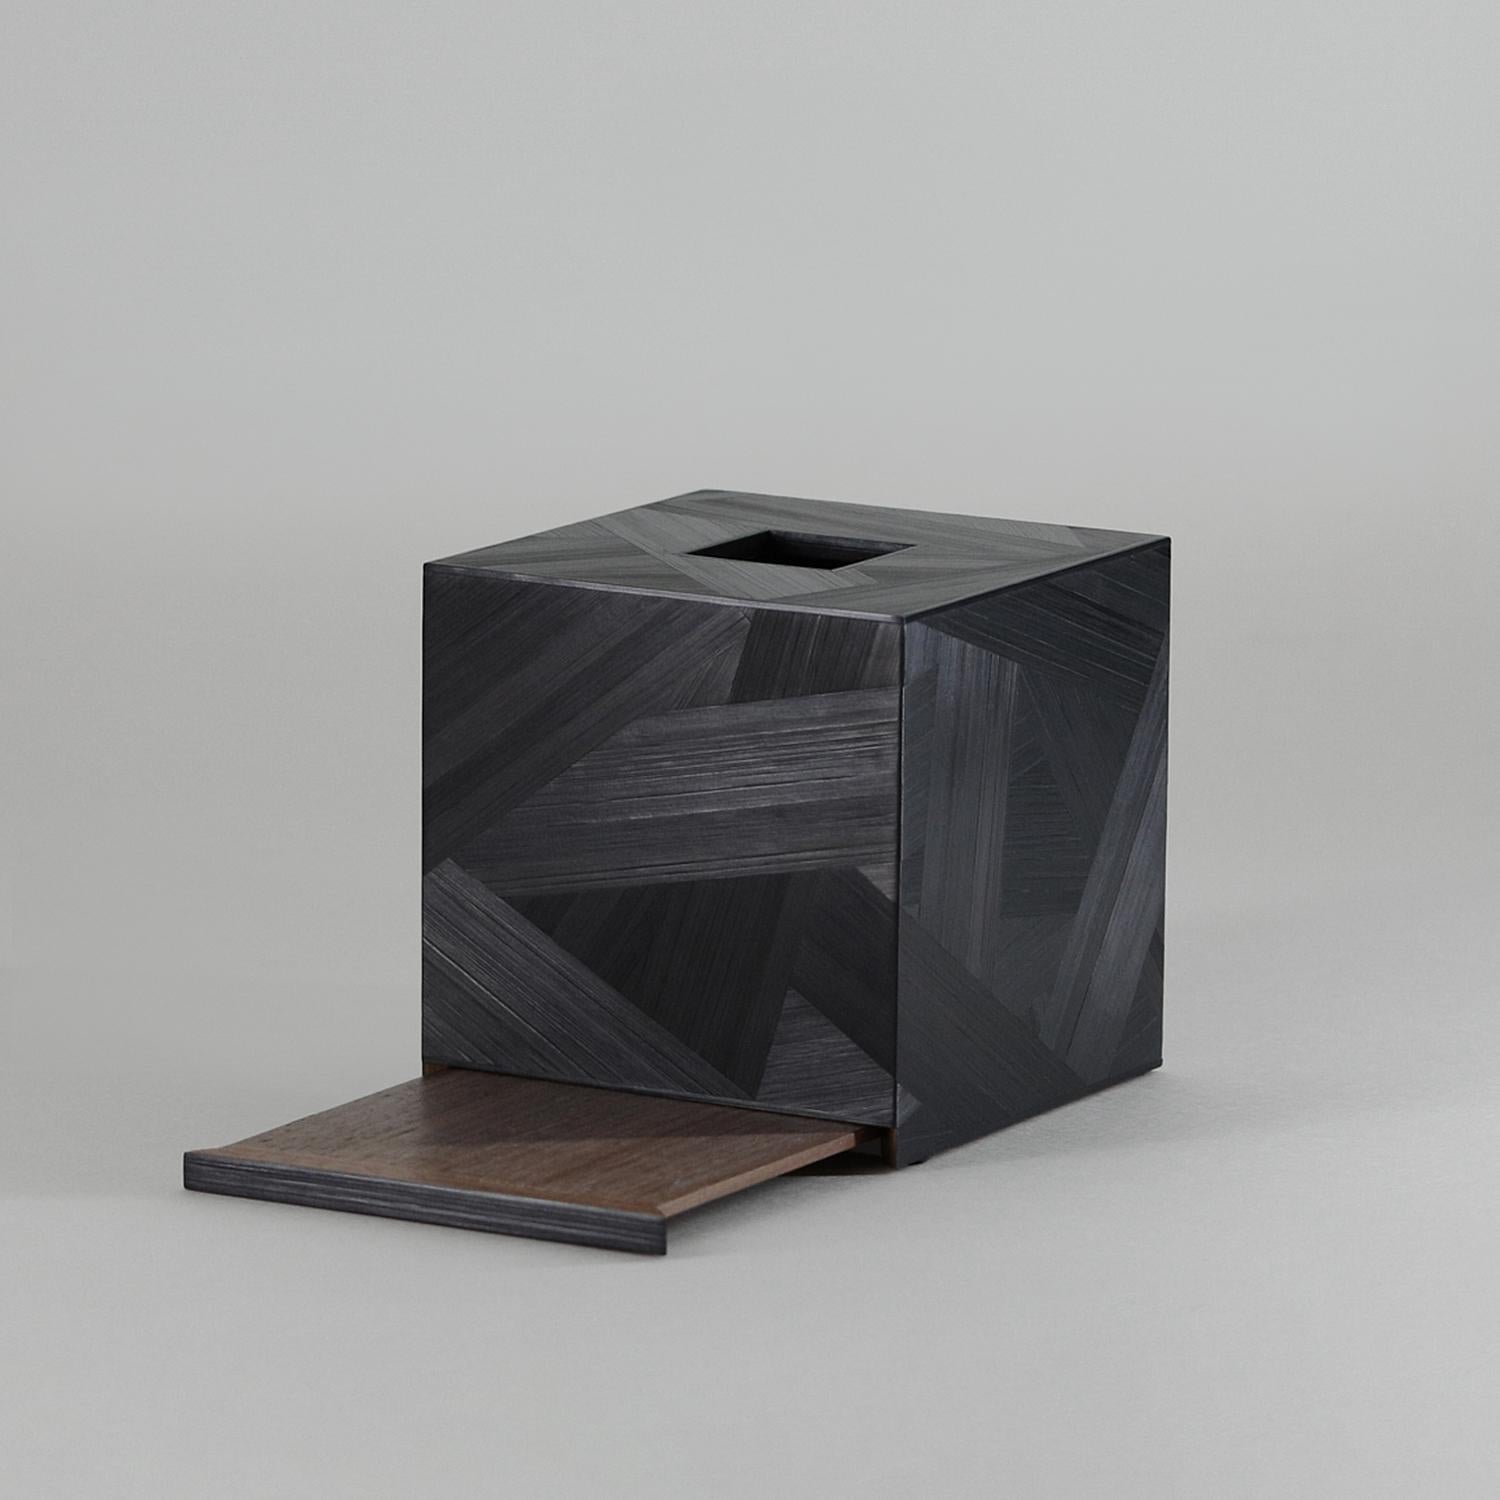 Art Deco Straw Marquetry Forest Tissue Box Square in Ebony Colour by Alexander Lamont For Sale